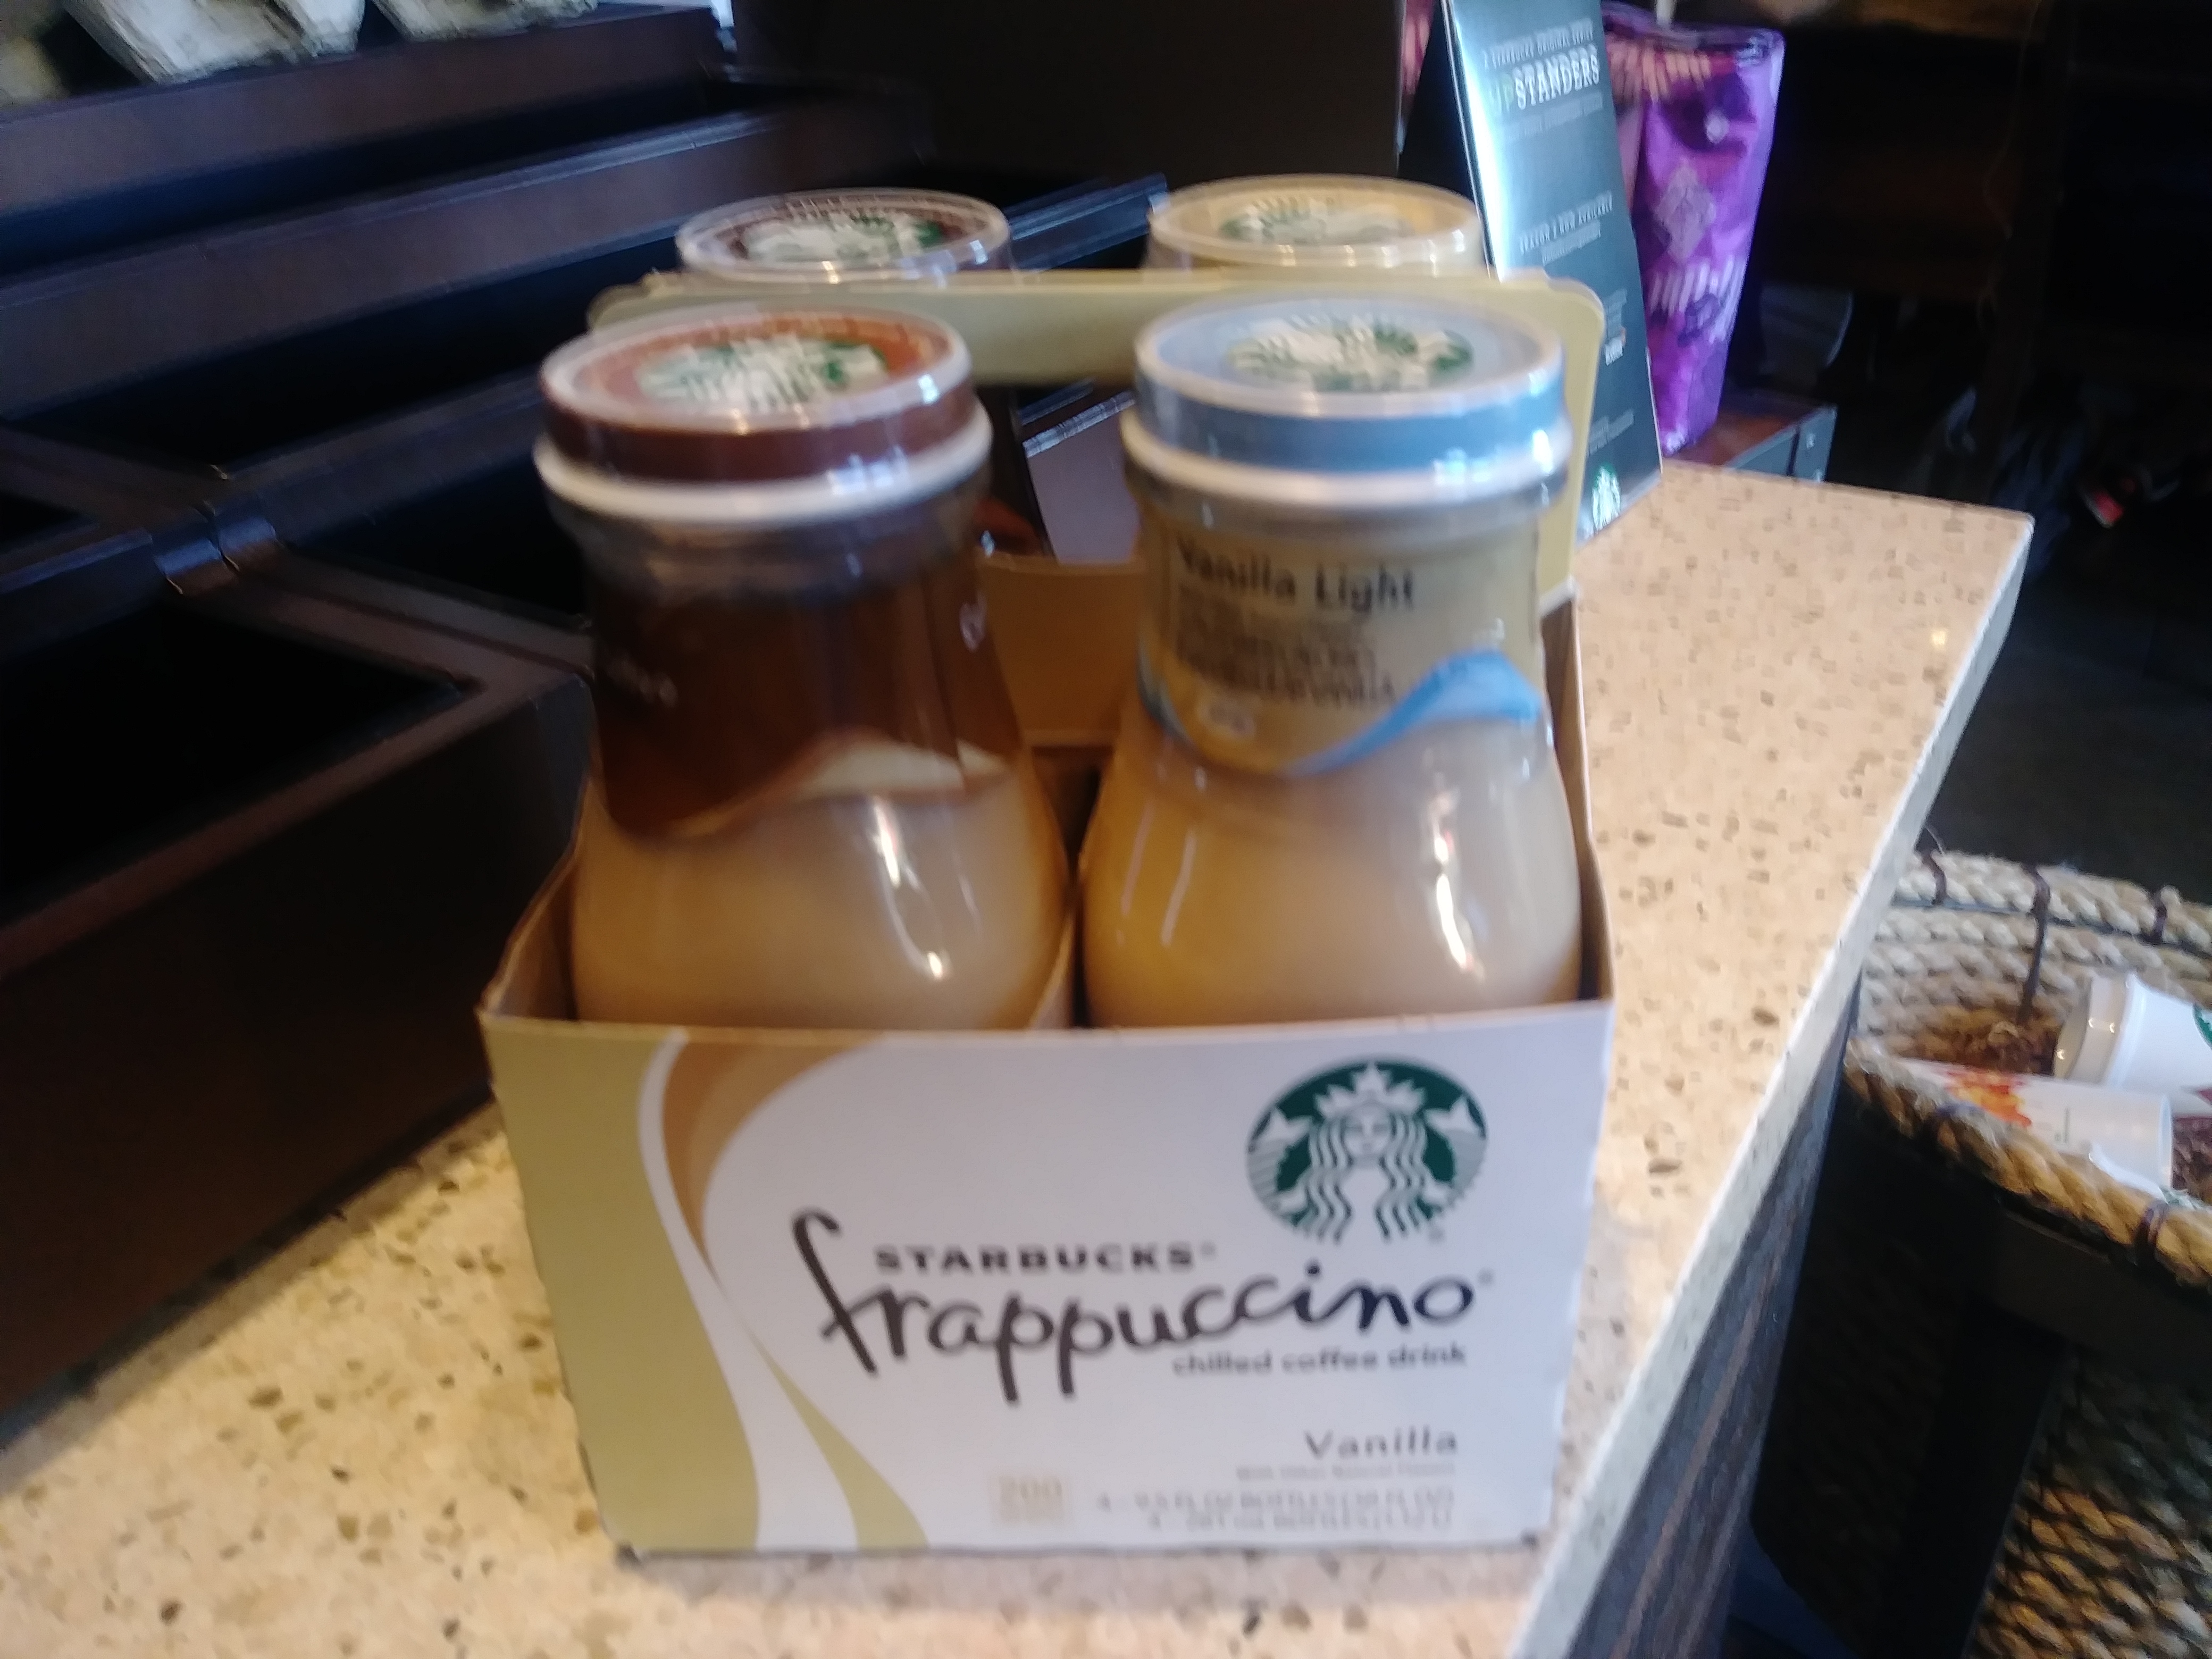 photos of the store and of the starbucks products that i bought.